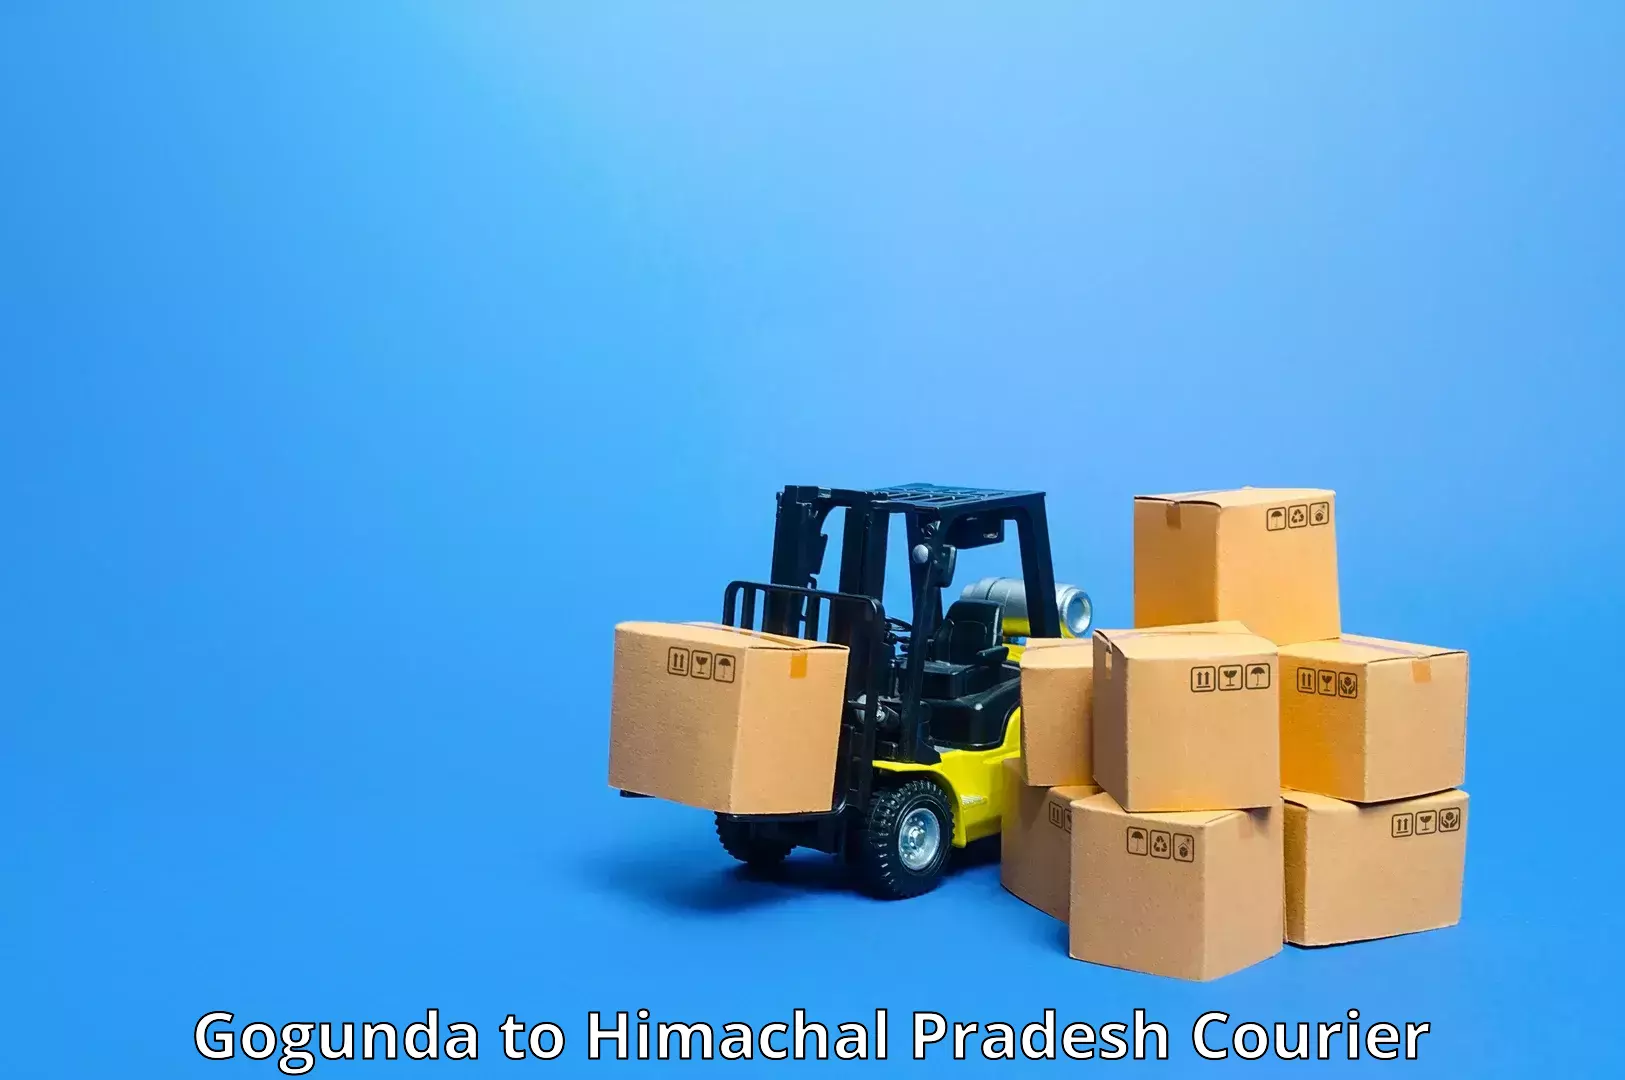 Express shipping Gogunda to YS Parmar University of Horticulture and Forestry Solan